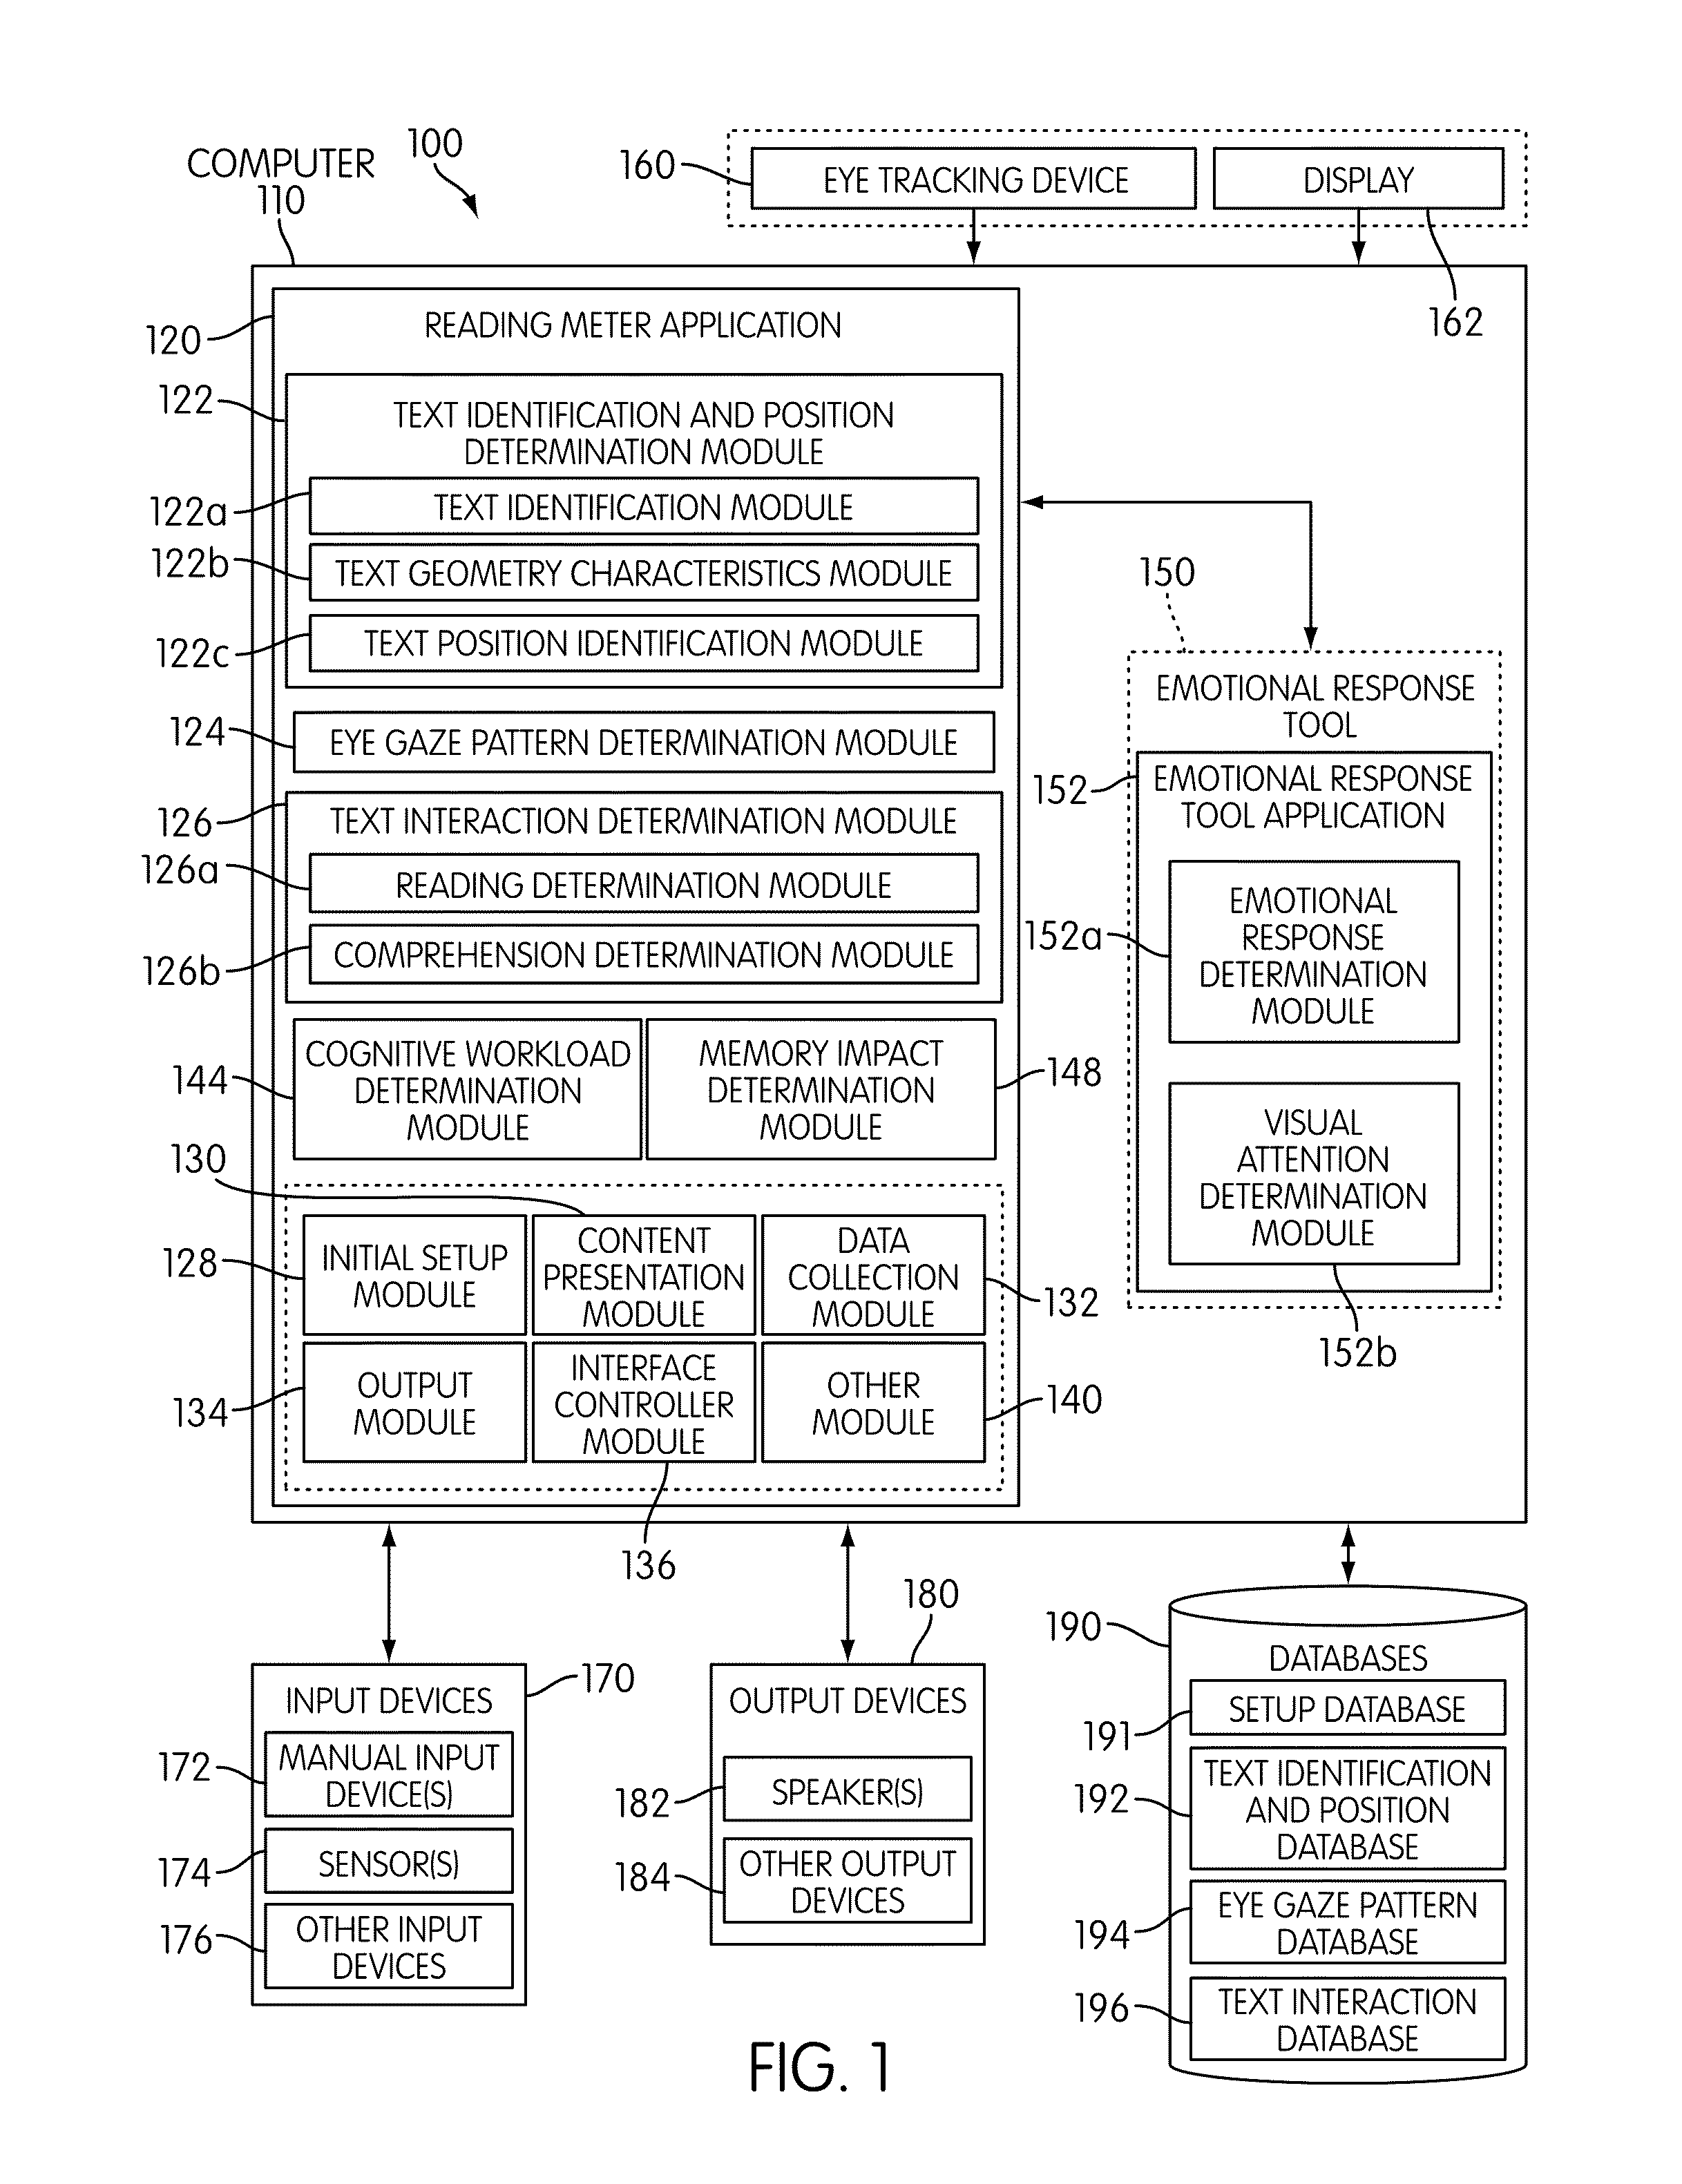 System and method for identifying the existence and position of text in visual media content and for determining a subjects interactions with the text